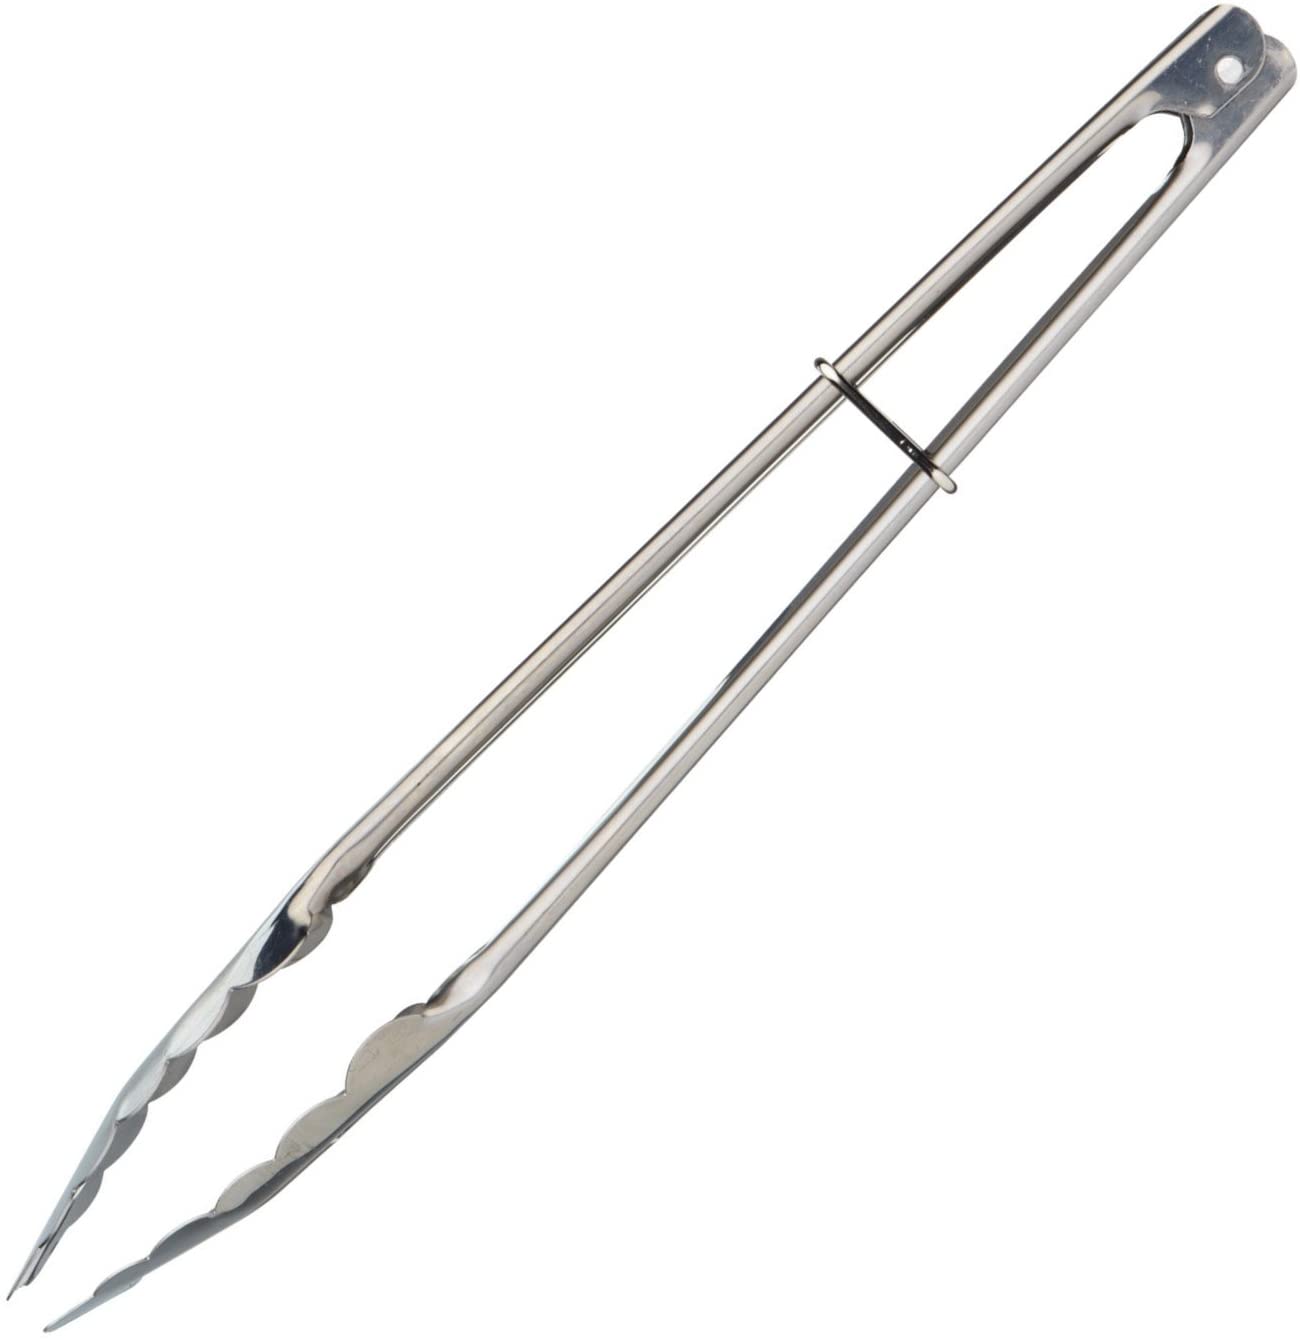 Kitchen craft gripping tongs, stainless steel, 30cm